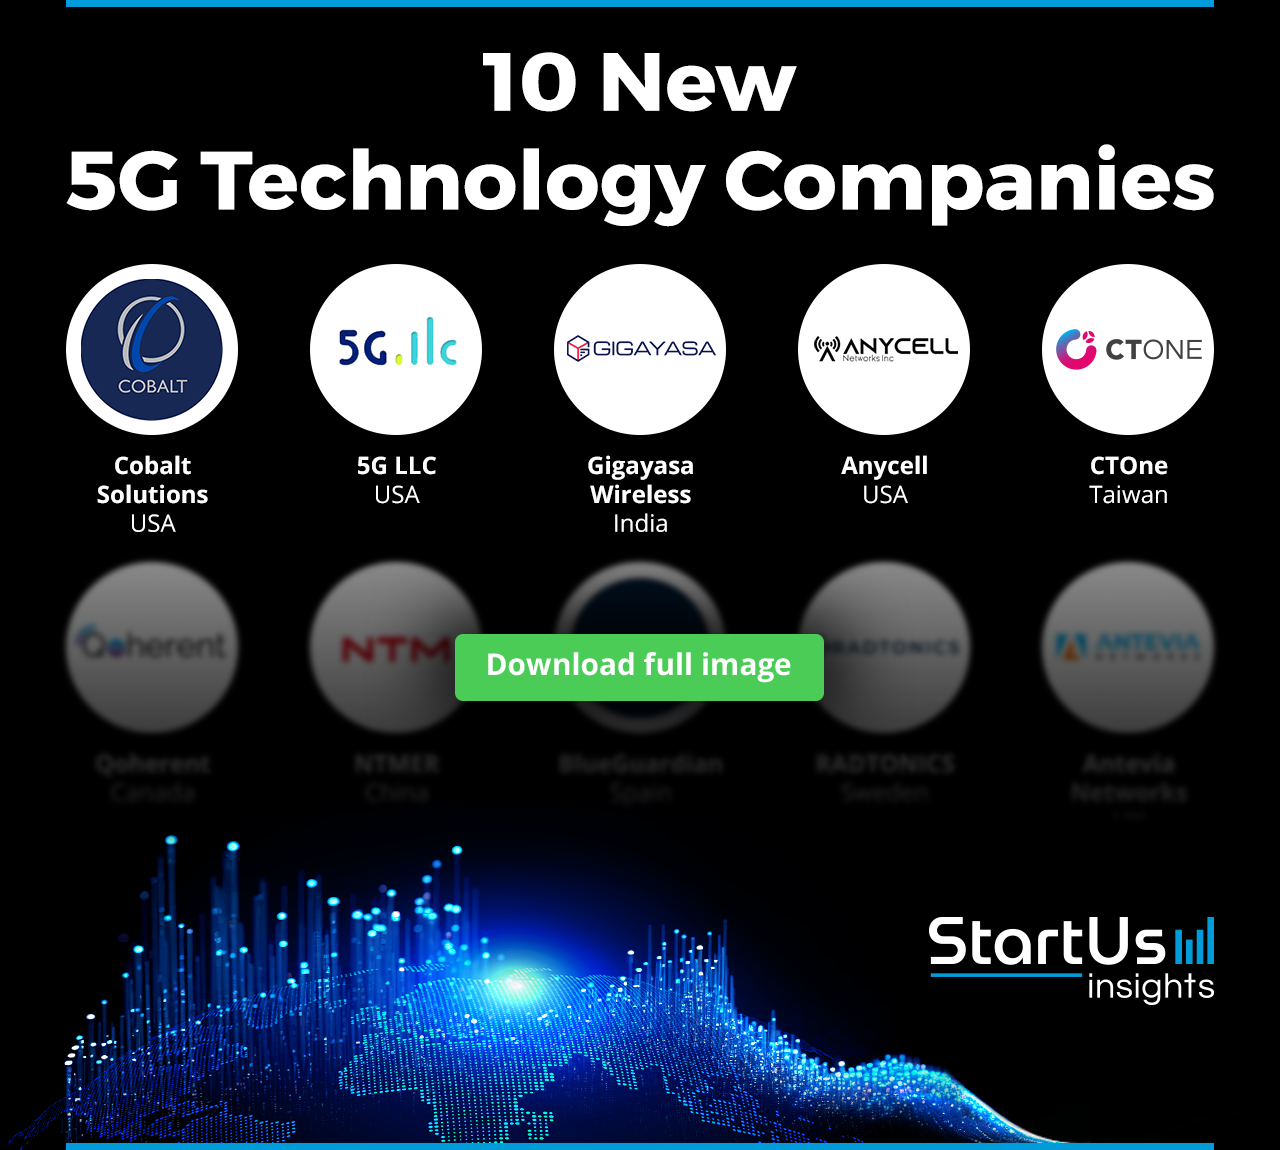 New-5G-Technology-Companies-Logos-Blurred-StartUs-Insights-noresize